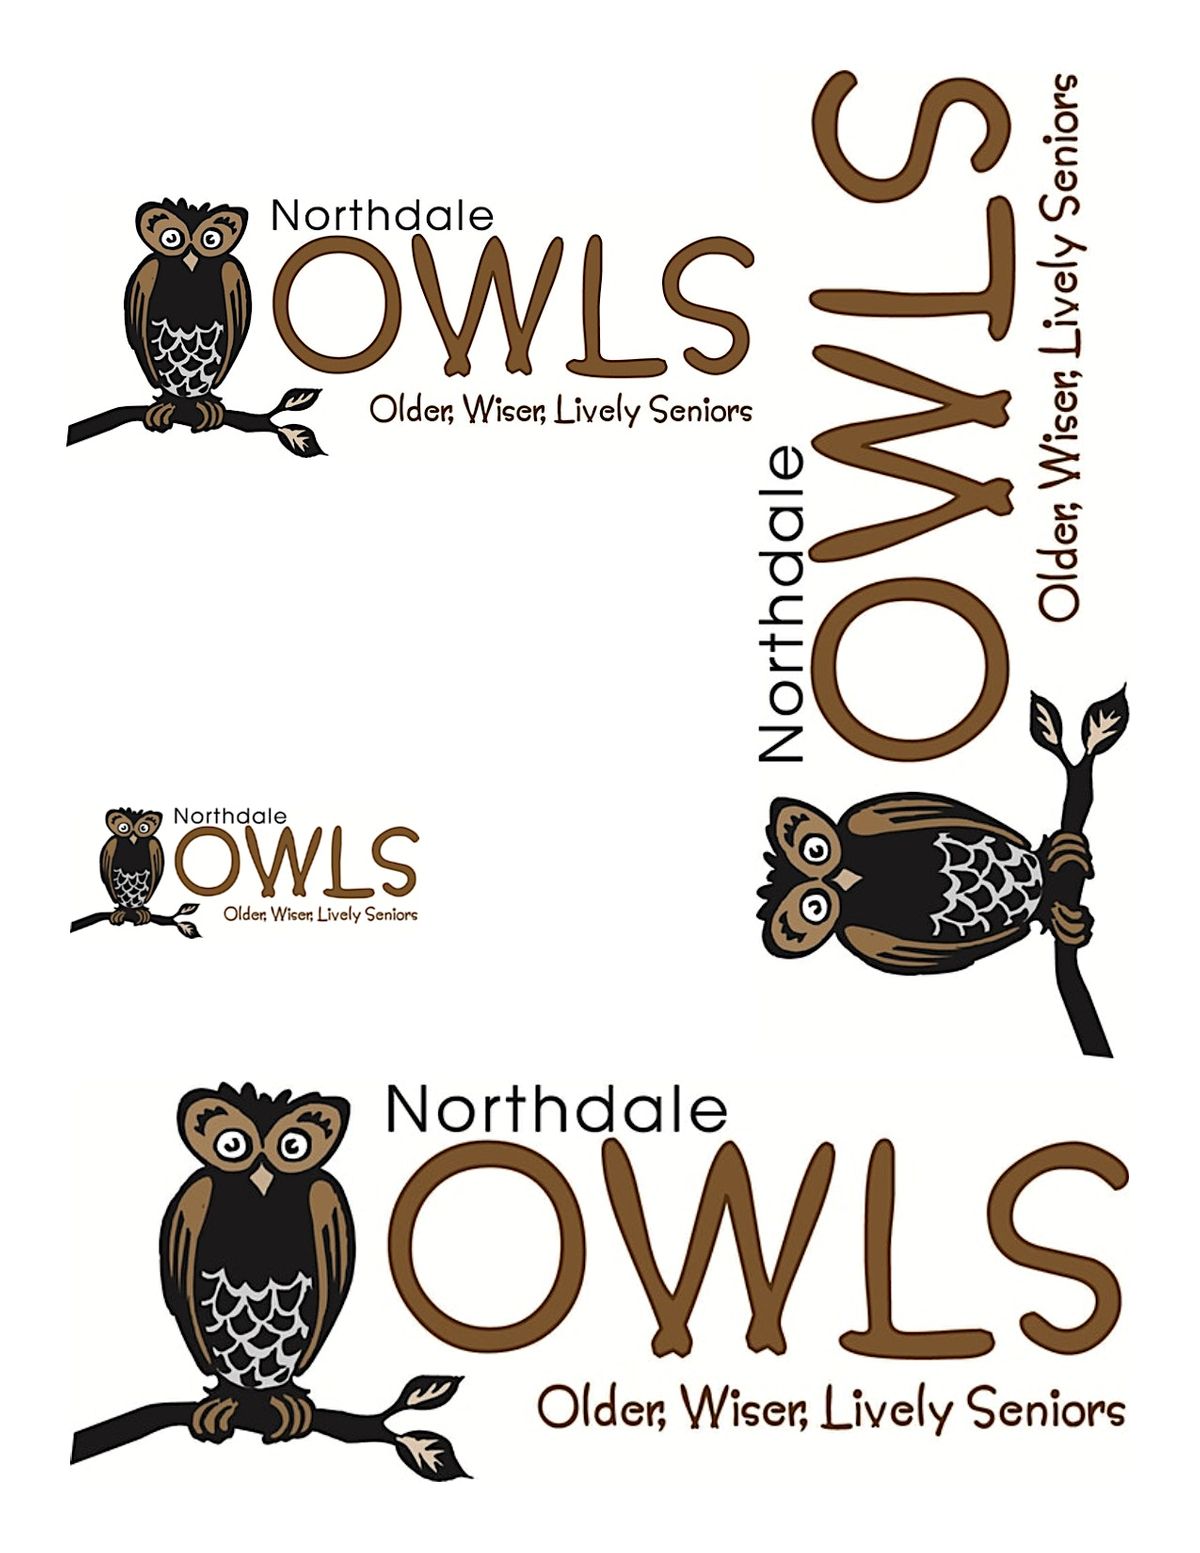 Northdale Owls 12 Consecutive Vendor Meetings Payments